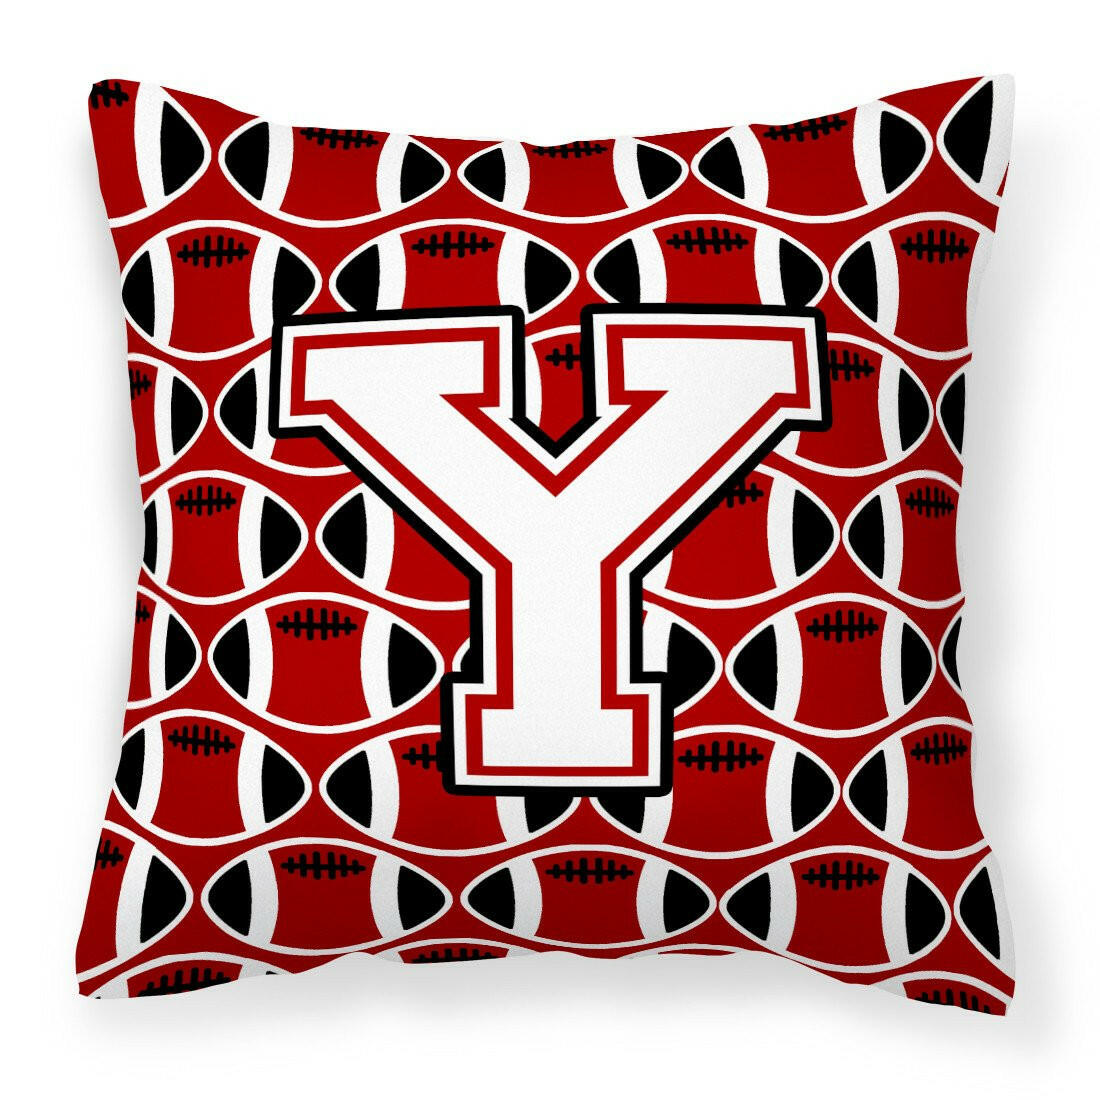 Letter Y Football Cardinal and White Fabric Decorative Pillow CJ1082-YPW1414 by Caroline's Treasures